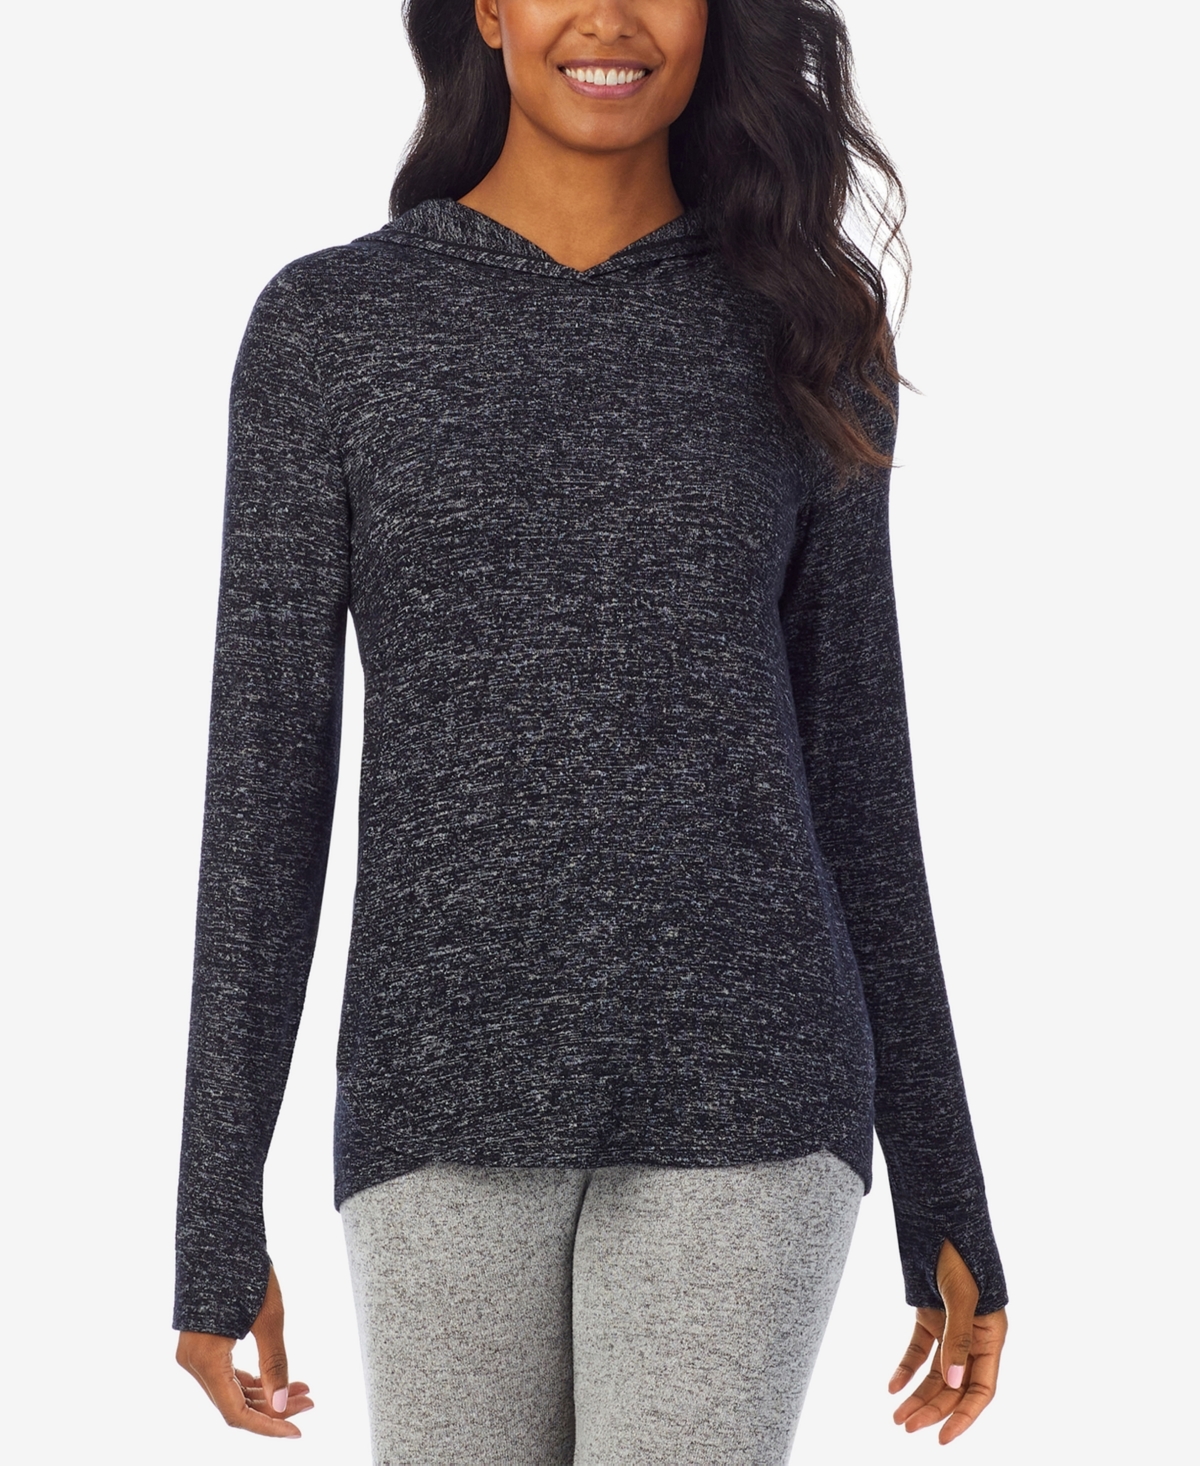 Cuddl Duds Petite Soft Knit Long-sleeve Tunic Hoodie In Marled Dark Charcoal